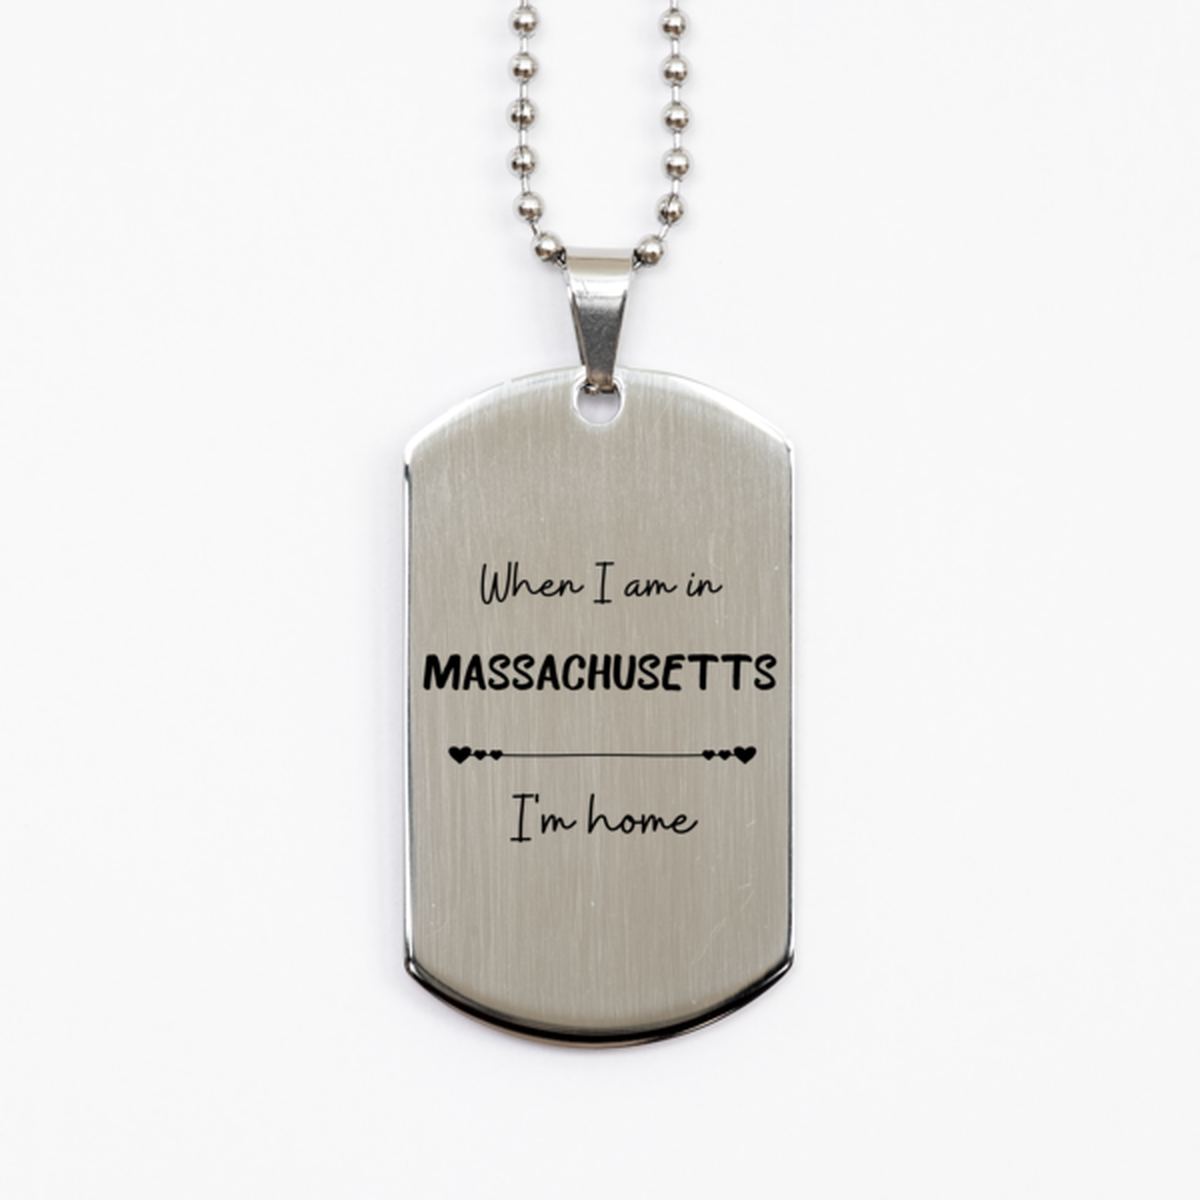 When I am in Massachusetts I'm home Silver Dog Tag, Cheap Gifts For Massachusetts, State Massachusetts Birthday Gifts for Friends Coworker